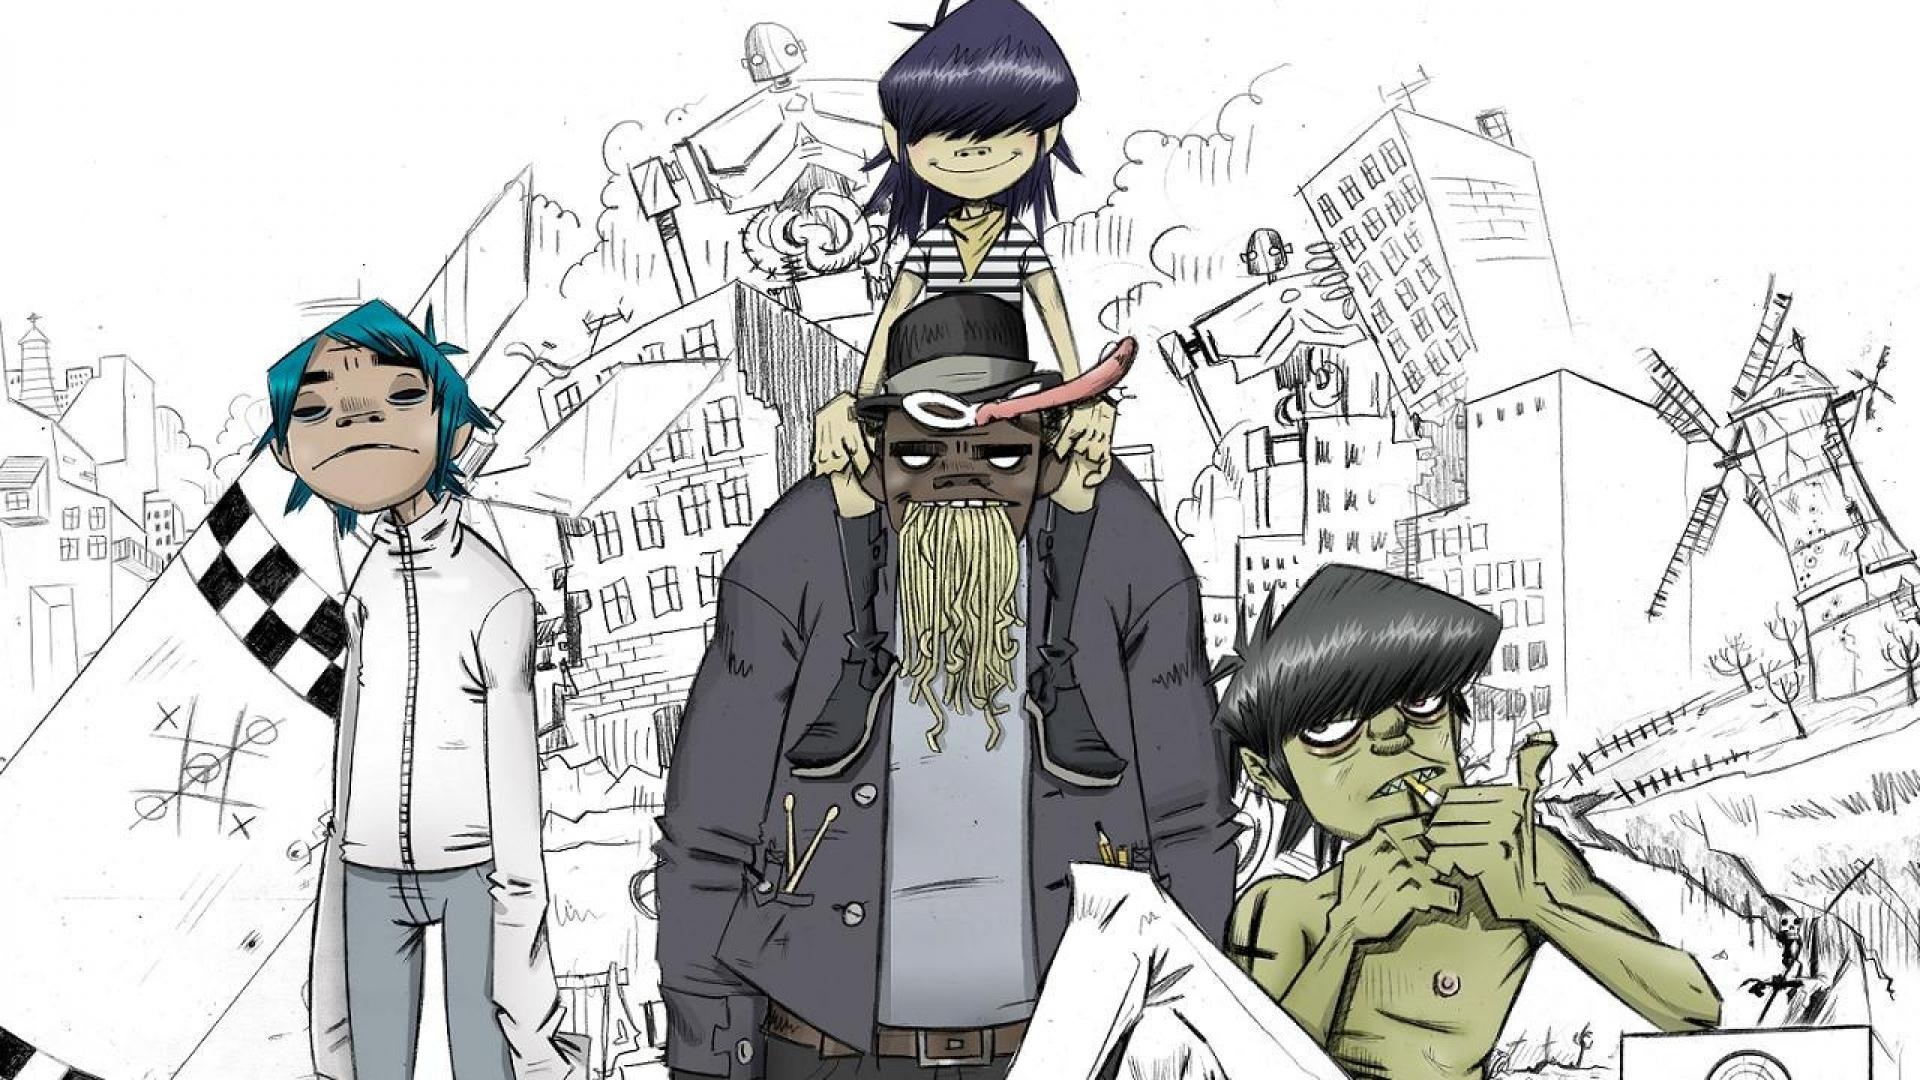 Gorillaz: The beloved raunchy animated band members, Damon Albarn, Comic strips and short cartoons. 1920x1080 Full HD Background.